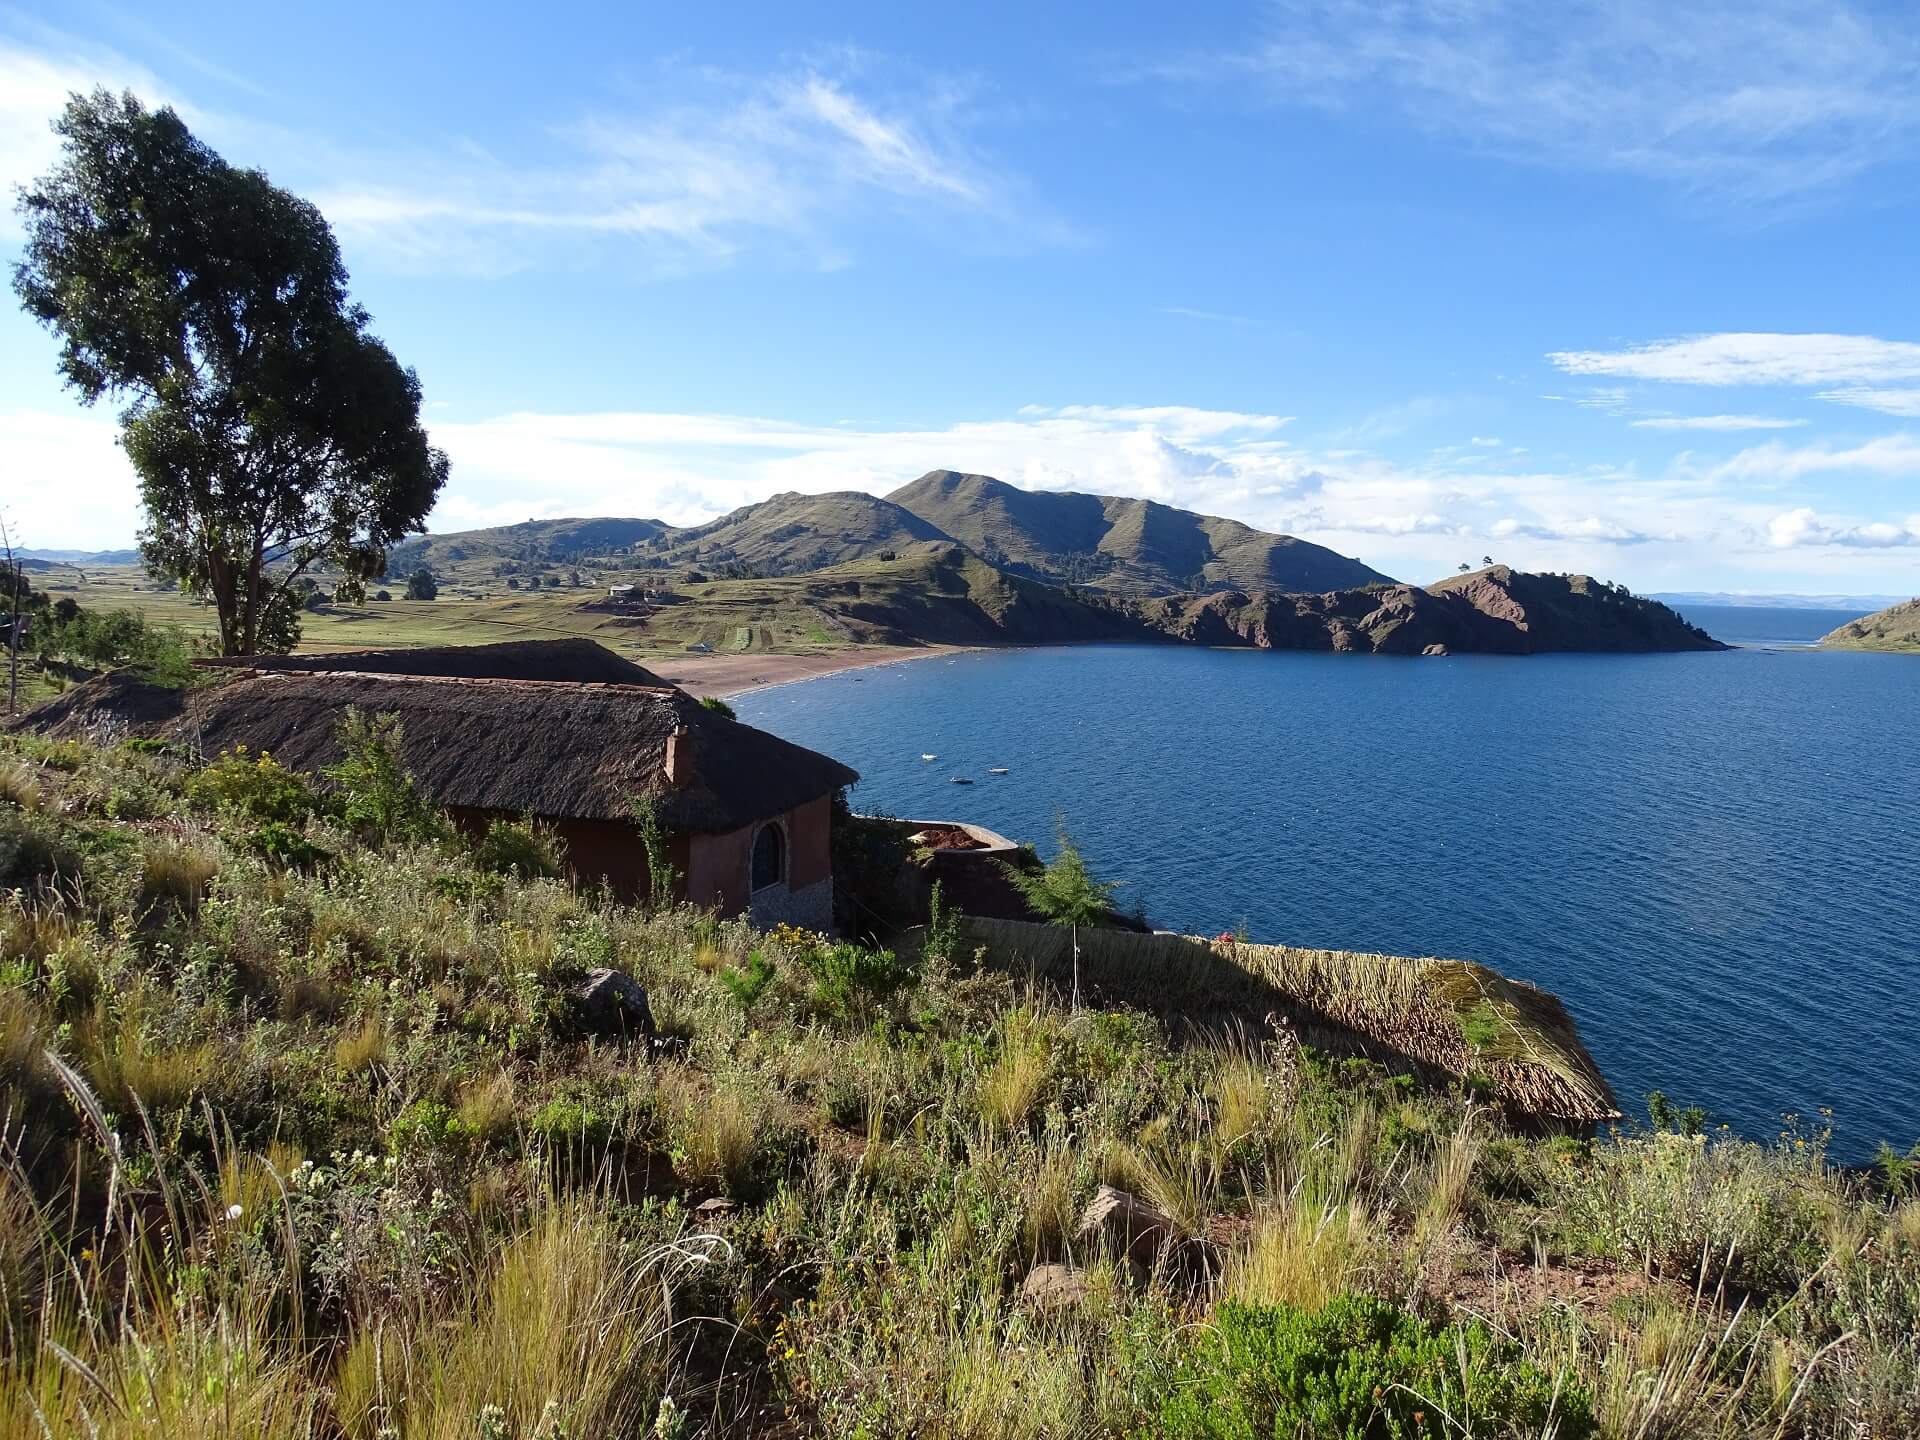 11Homestay accommodation on the peninsula of Capachica overlooking the Chifrón beach and Lake Titicaca. Stay here with RESPONSible Travel Peru!